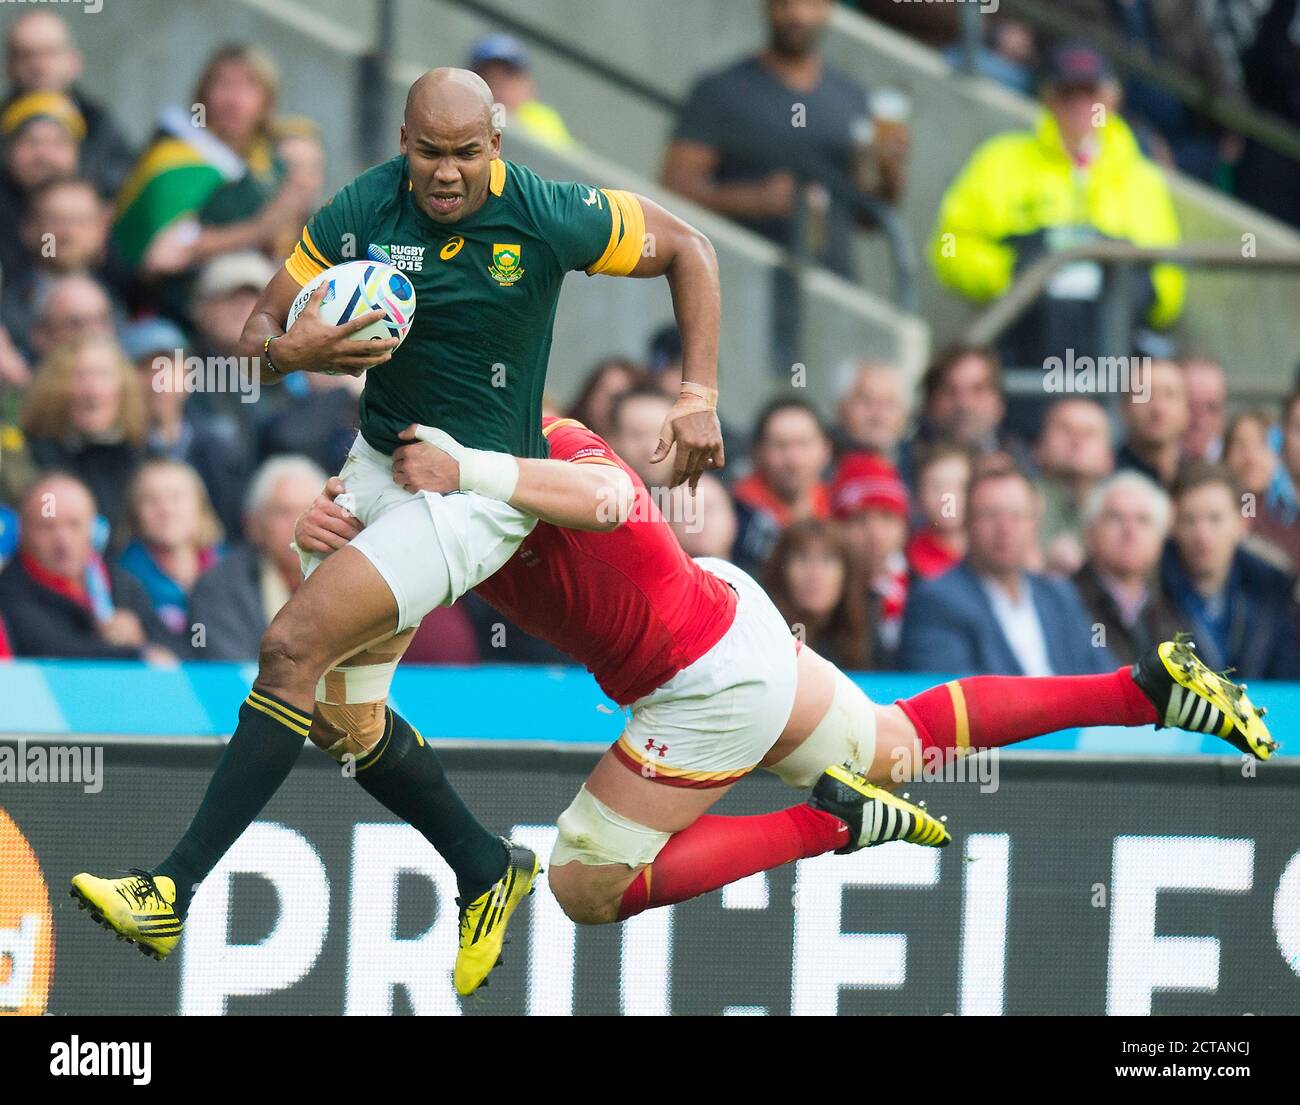 J.P.PIETERSEN CHARGES THROUGH  Wales v South Africa Quarter Final Rugby World Cup 2015  Twickenham Stadium   Copyright Picture : Mark Pain 17/10/2015 Stock Photo